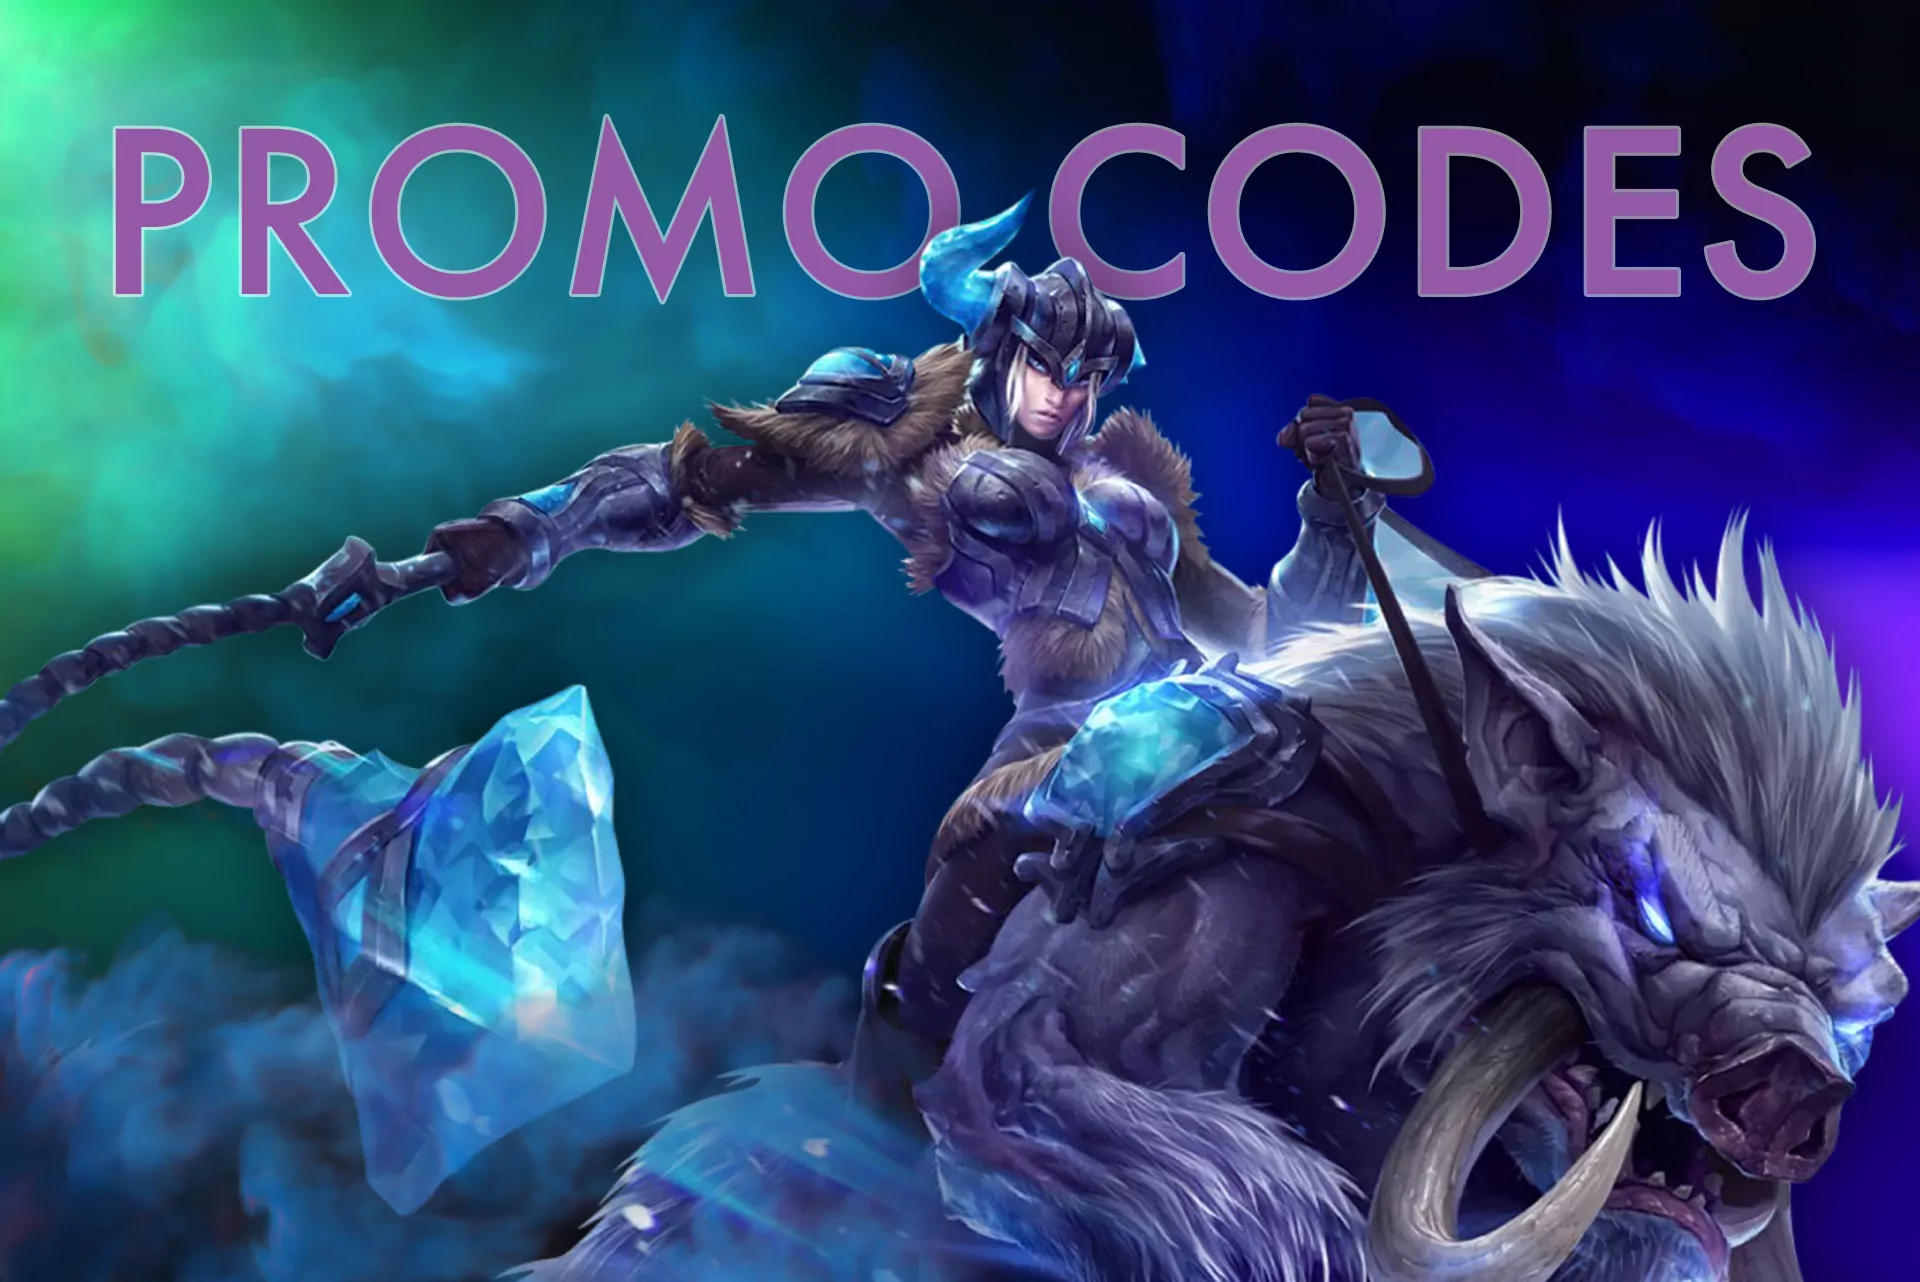 Promo codes are useful for users who don't have an account yet.